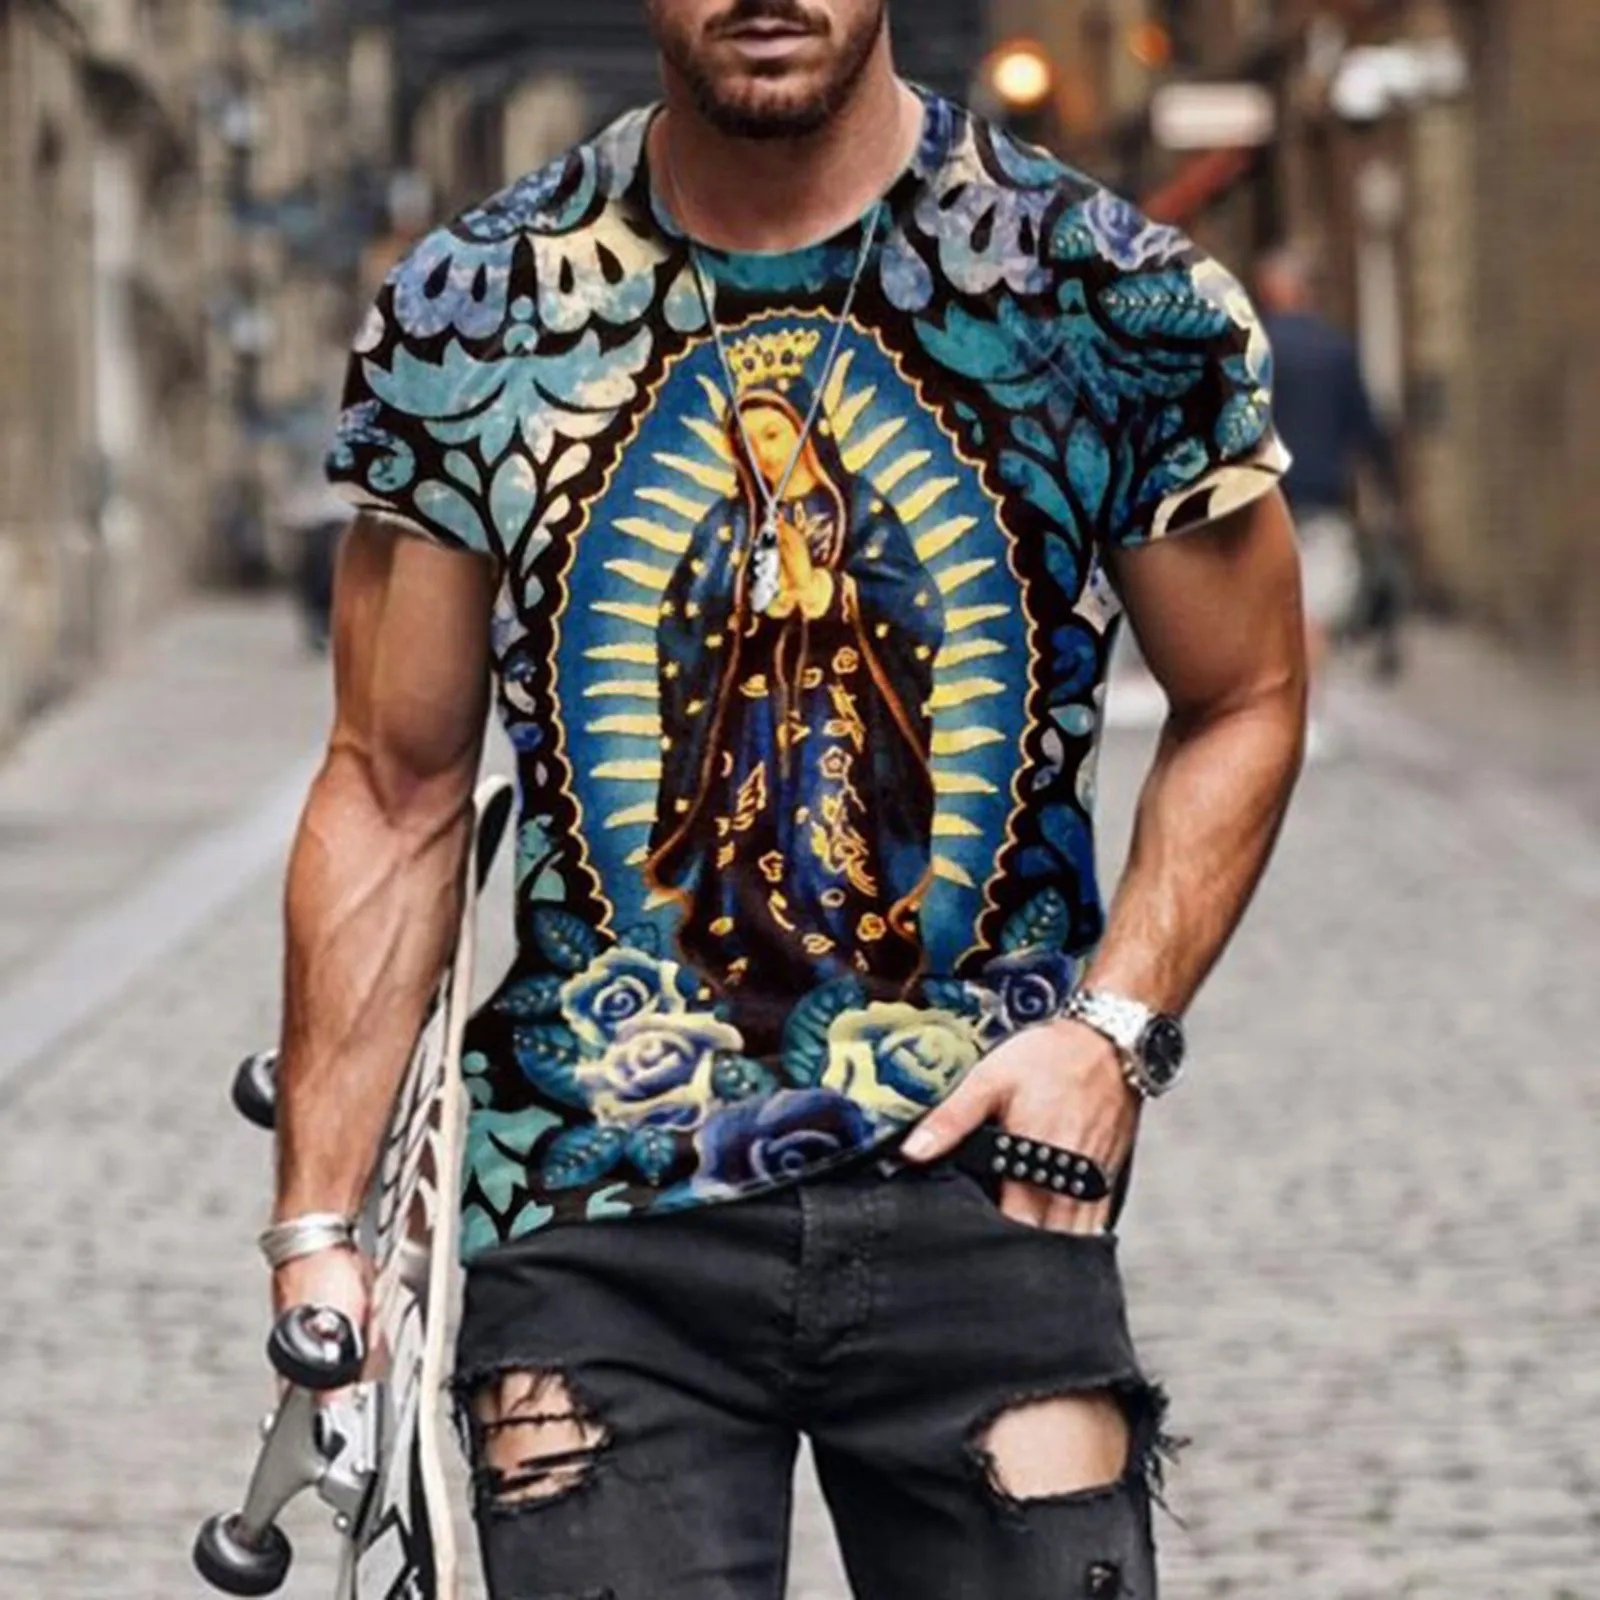 

2021 New Fashion Men 3d T Shirt Funny Printed Chest Hair Muscle Short Sleeve Summer Men's Tshirts Funny Monkey Face T-shirt